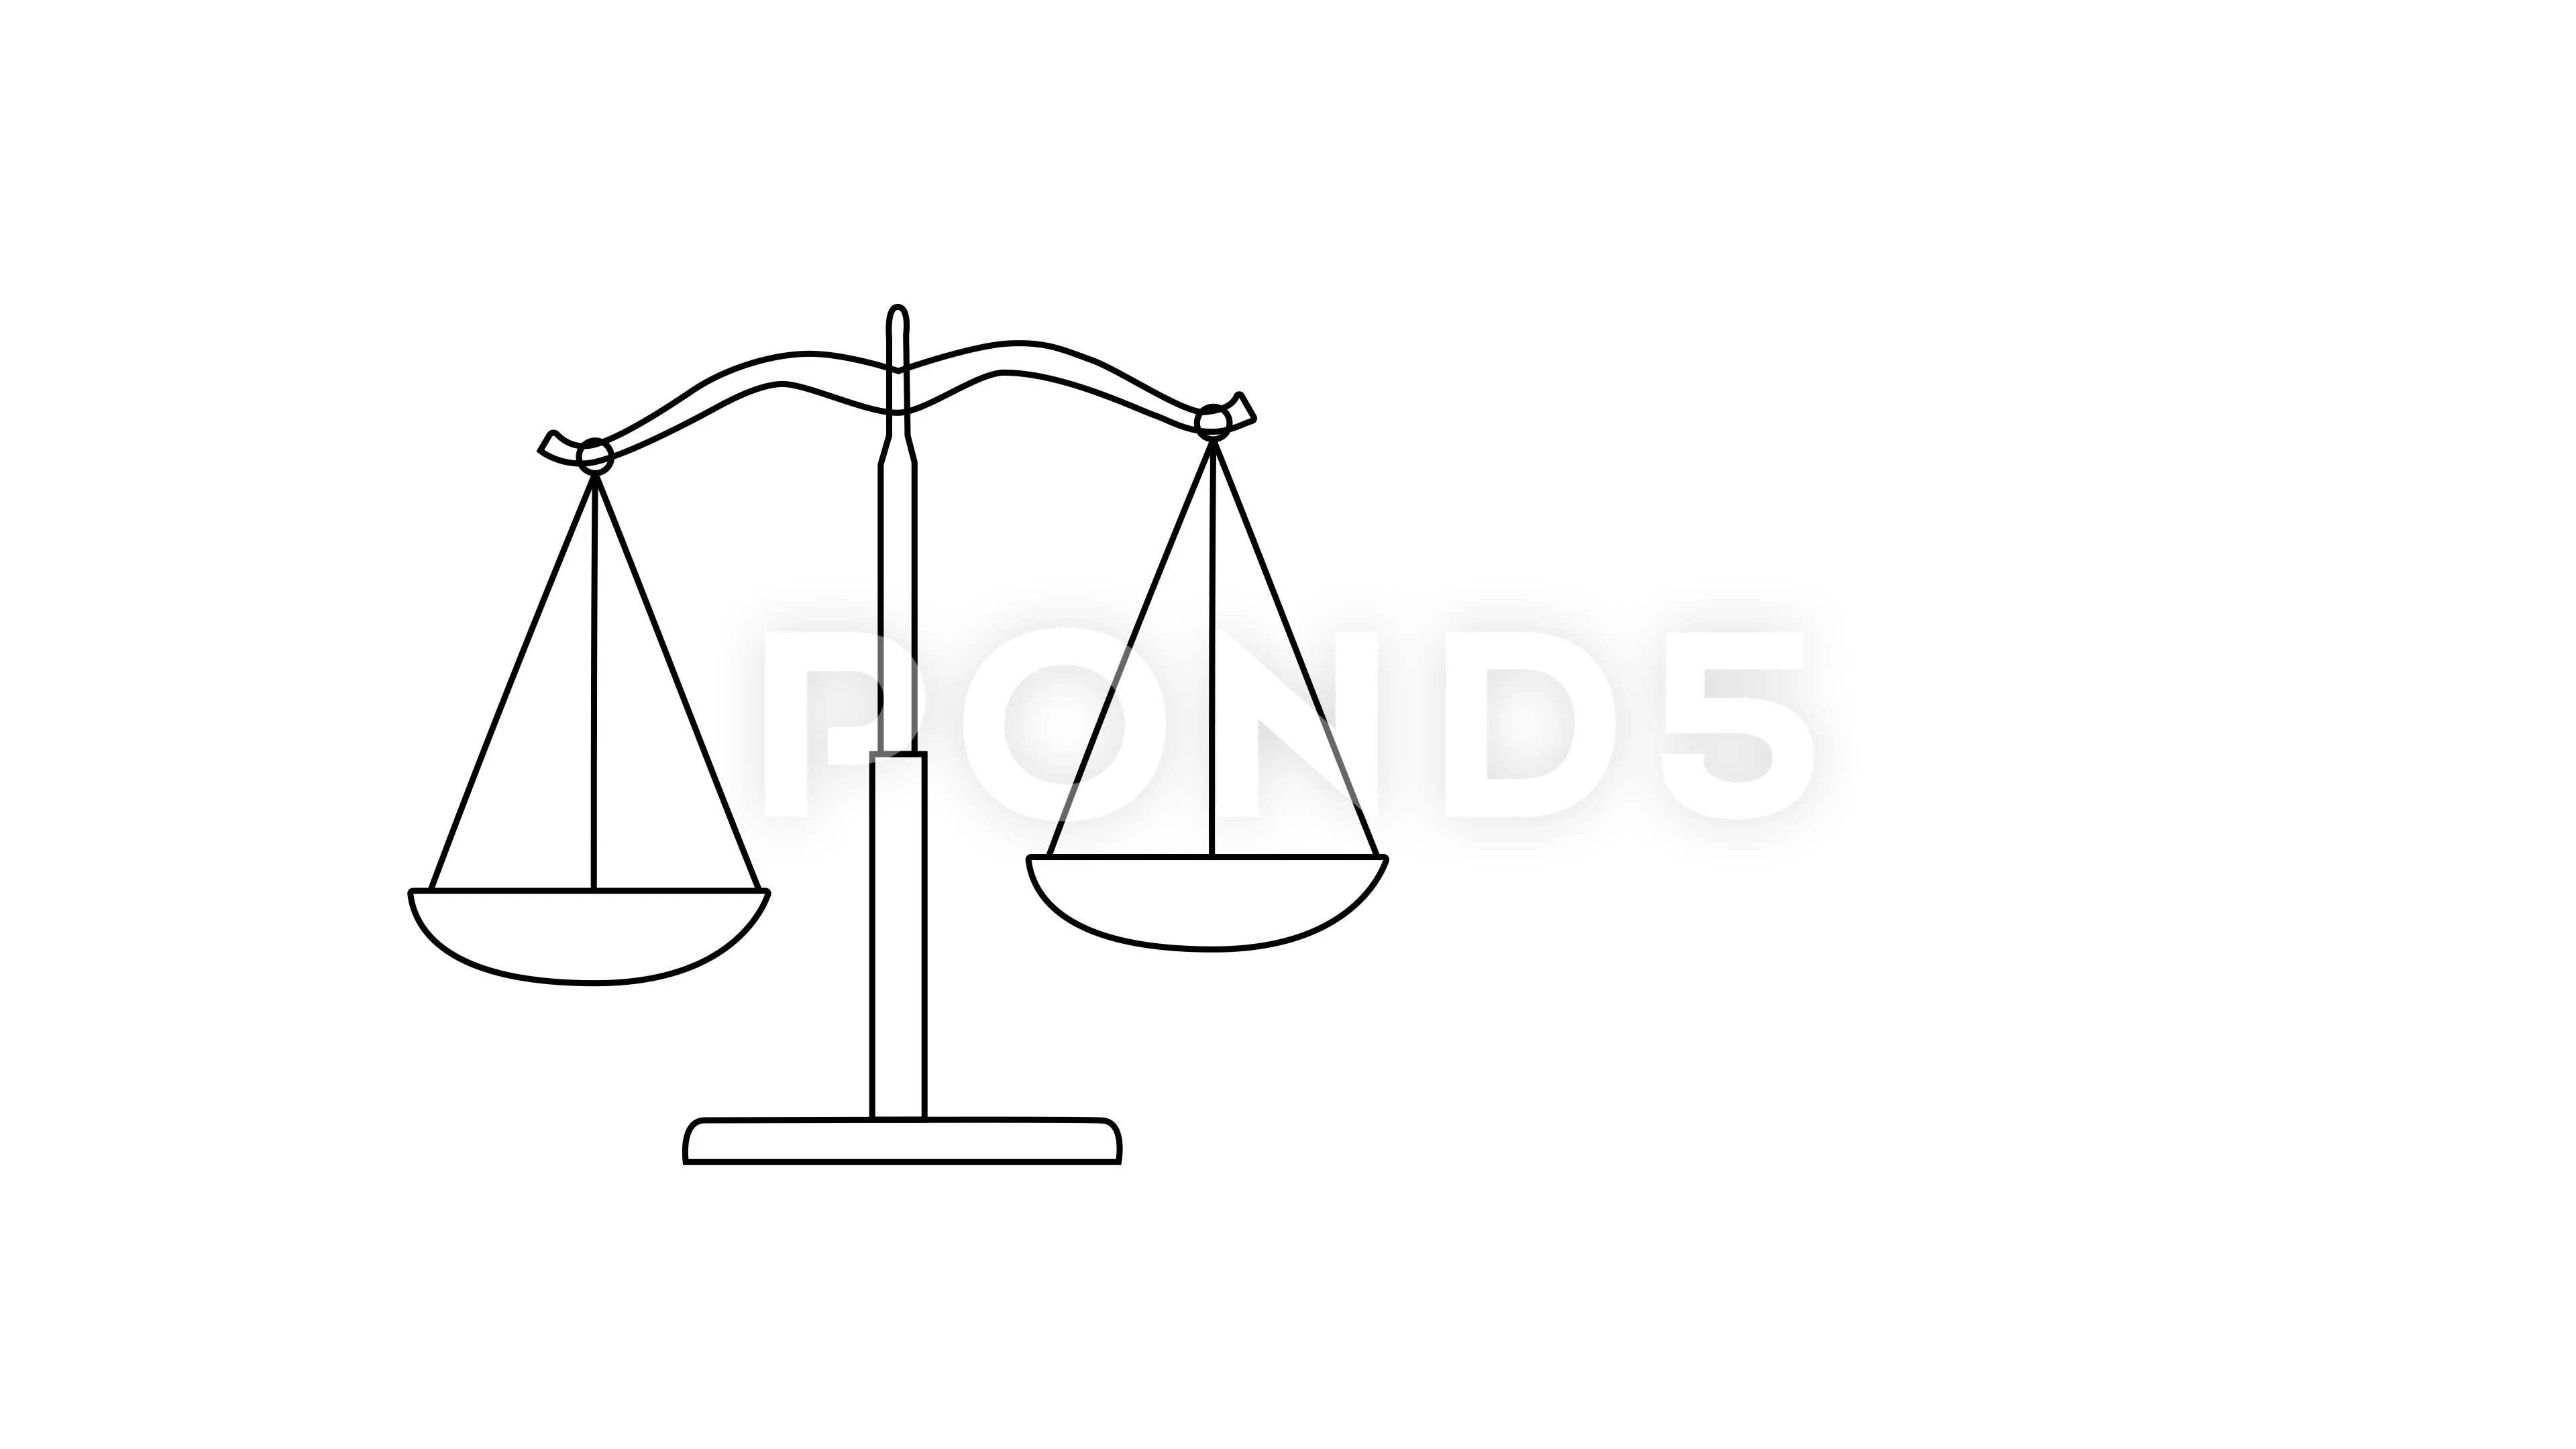 Pair Of Scales Symbol Drawing Stock Illustration - Download Image Now - Weight  Scale, Sketch, Drawing - Art Product - iStock